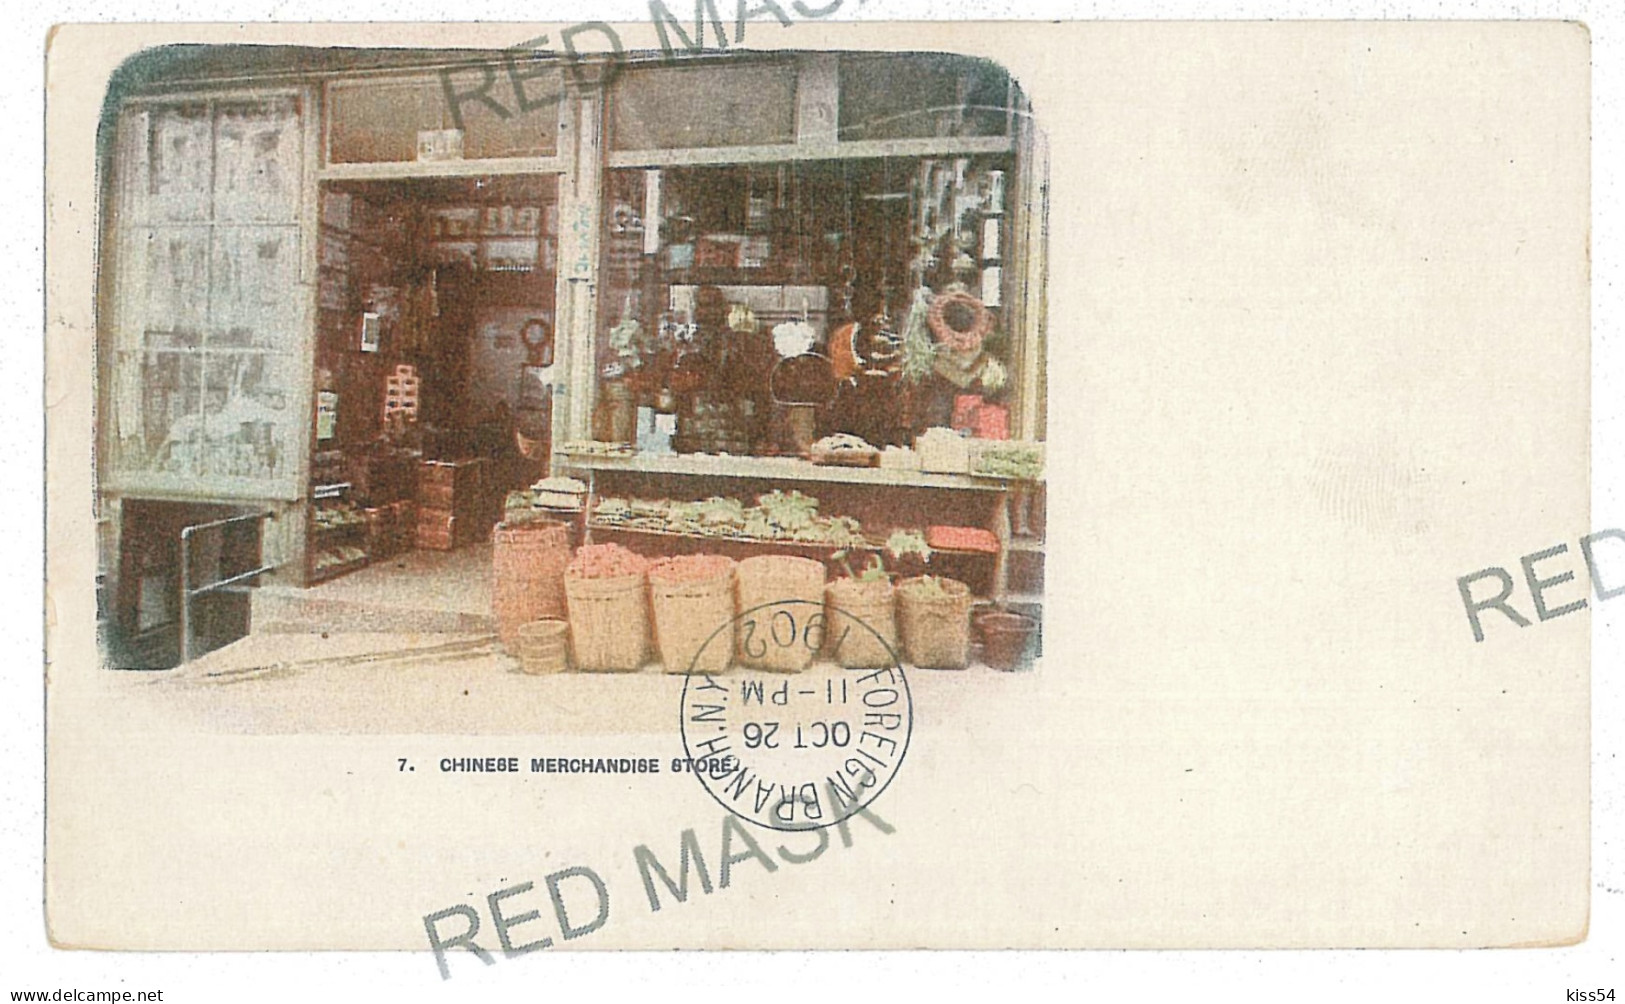 CH 75 - 10500 Chinese Store In San Francisco - Old Private Postcard - Used - 1902 - Chine